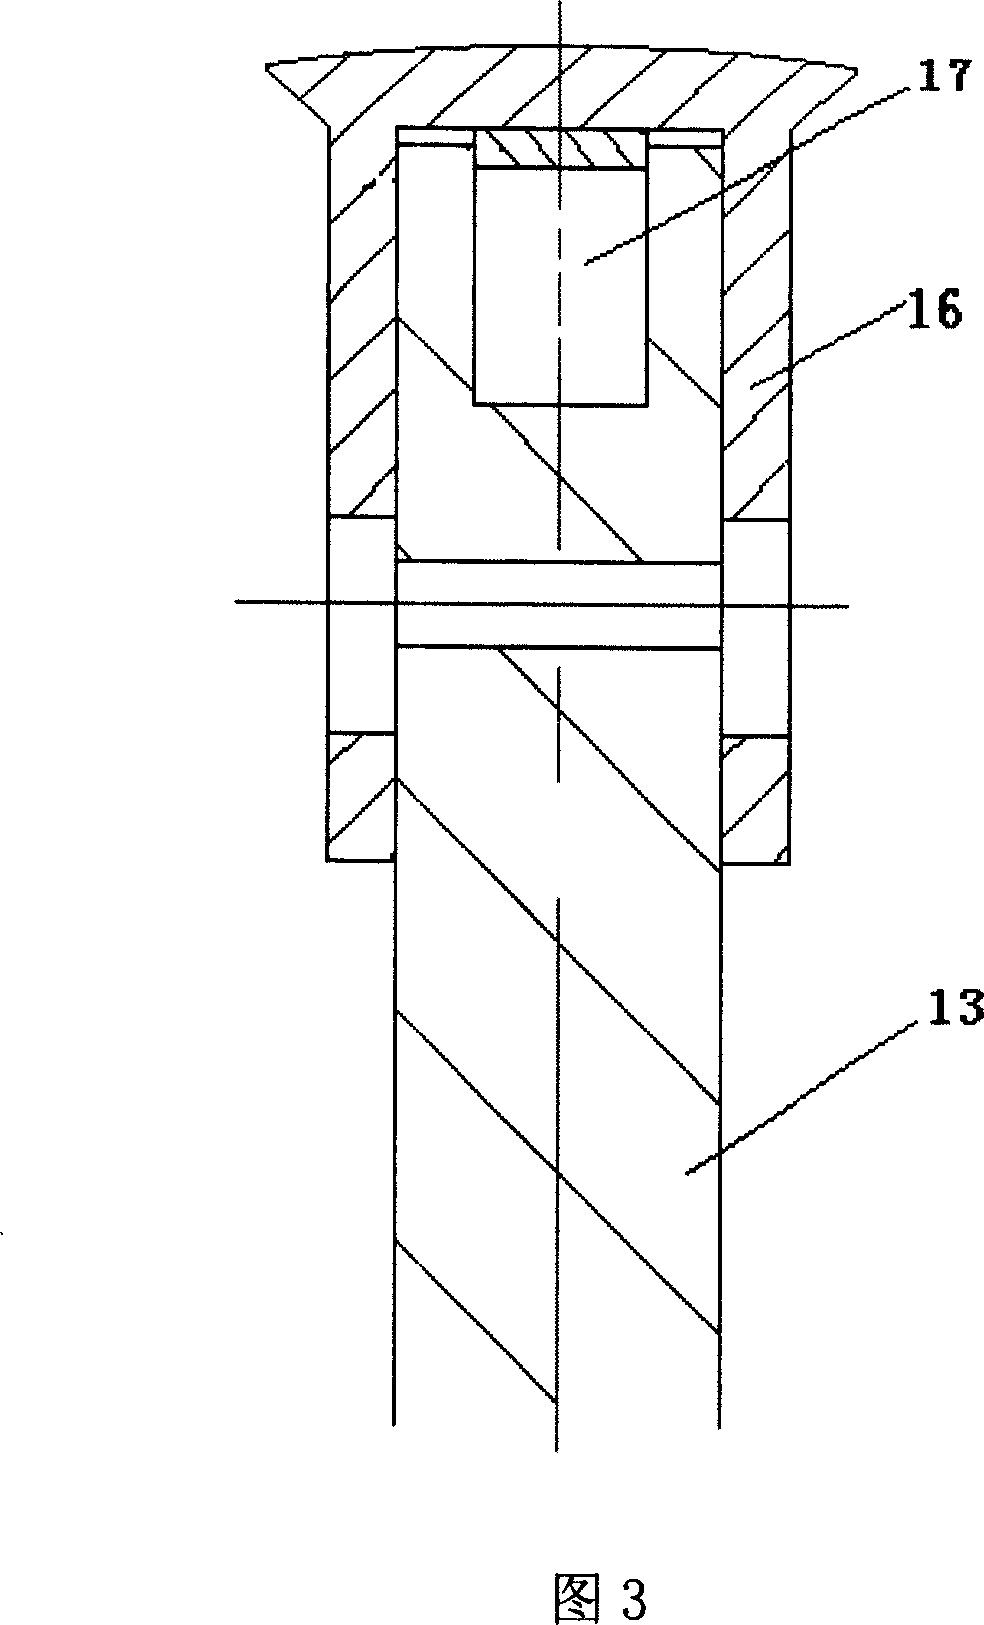 High-temperature and high-pressure wheeled continuous feeding airlock system